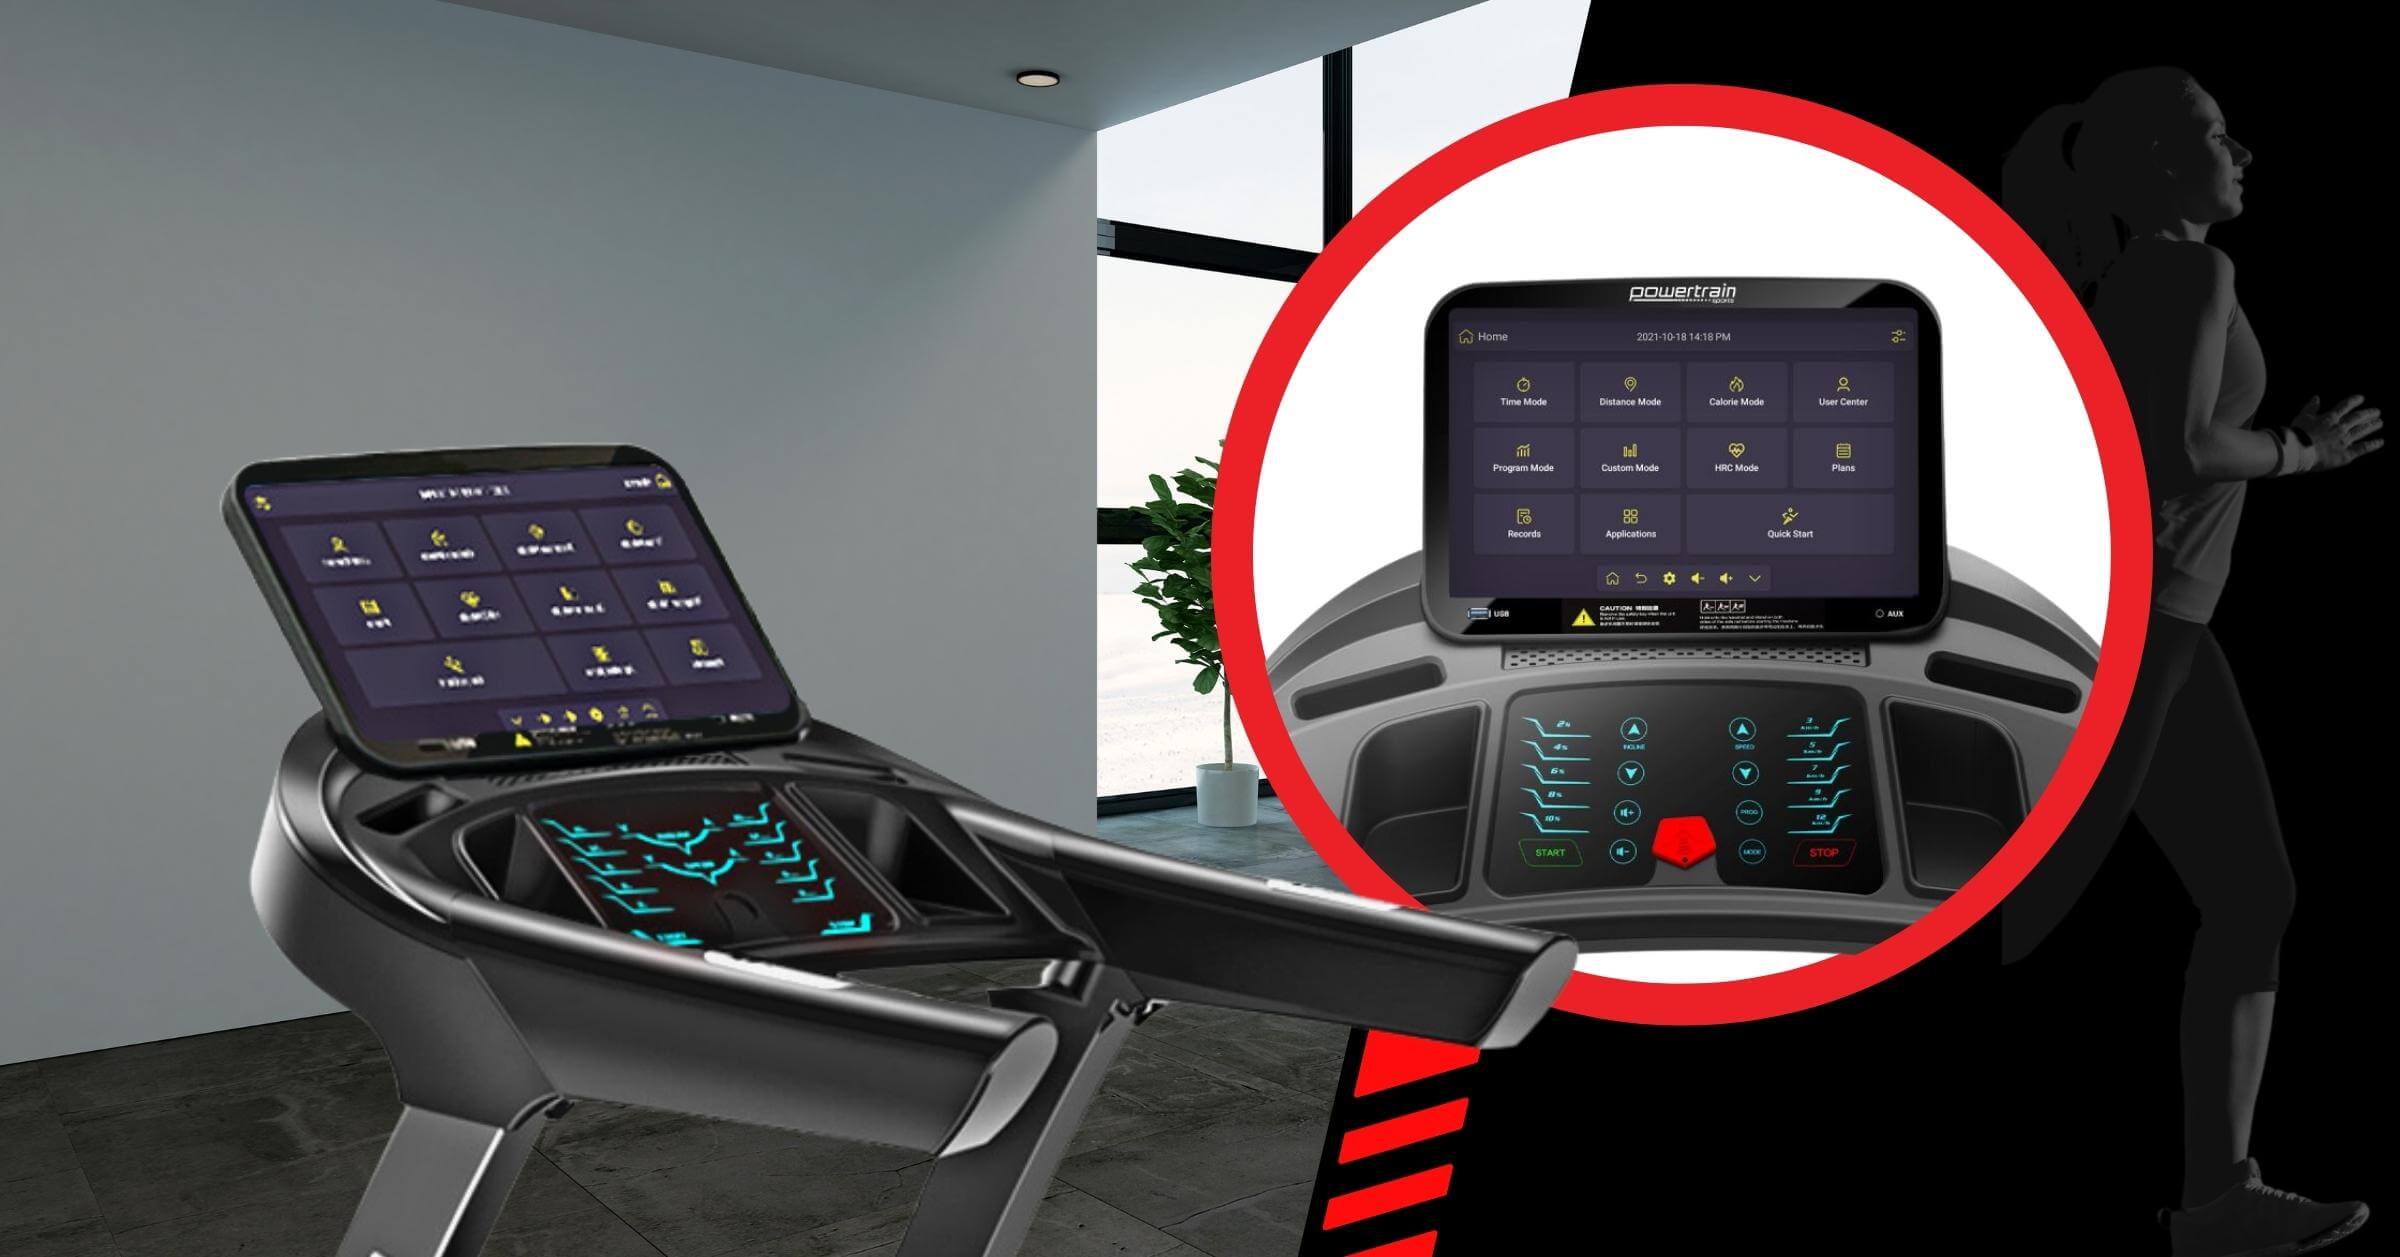 The console is an important part of any treadmill